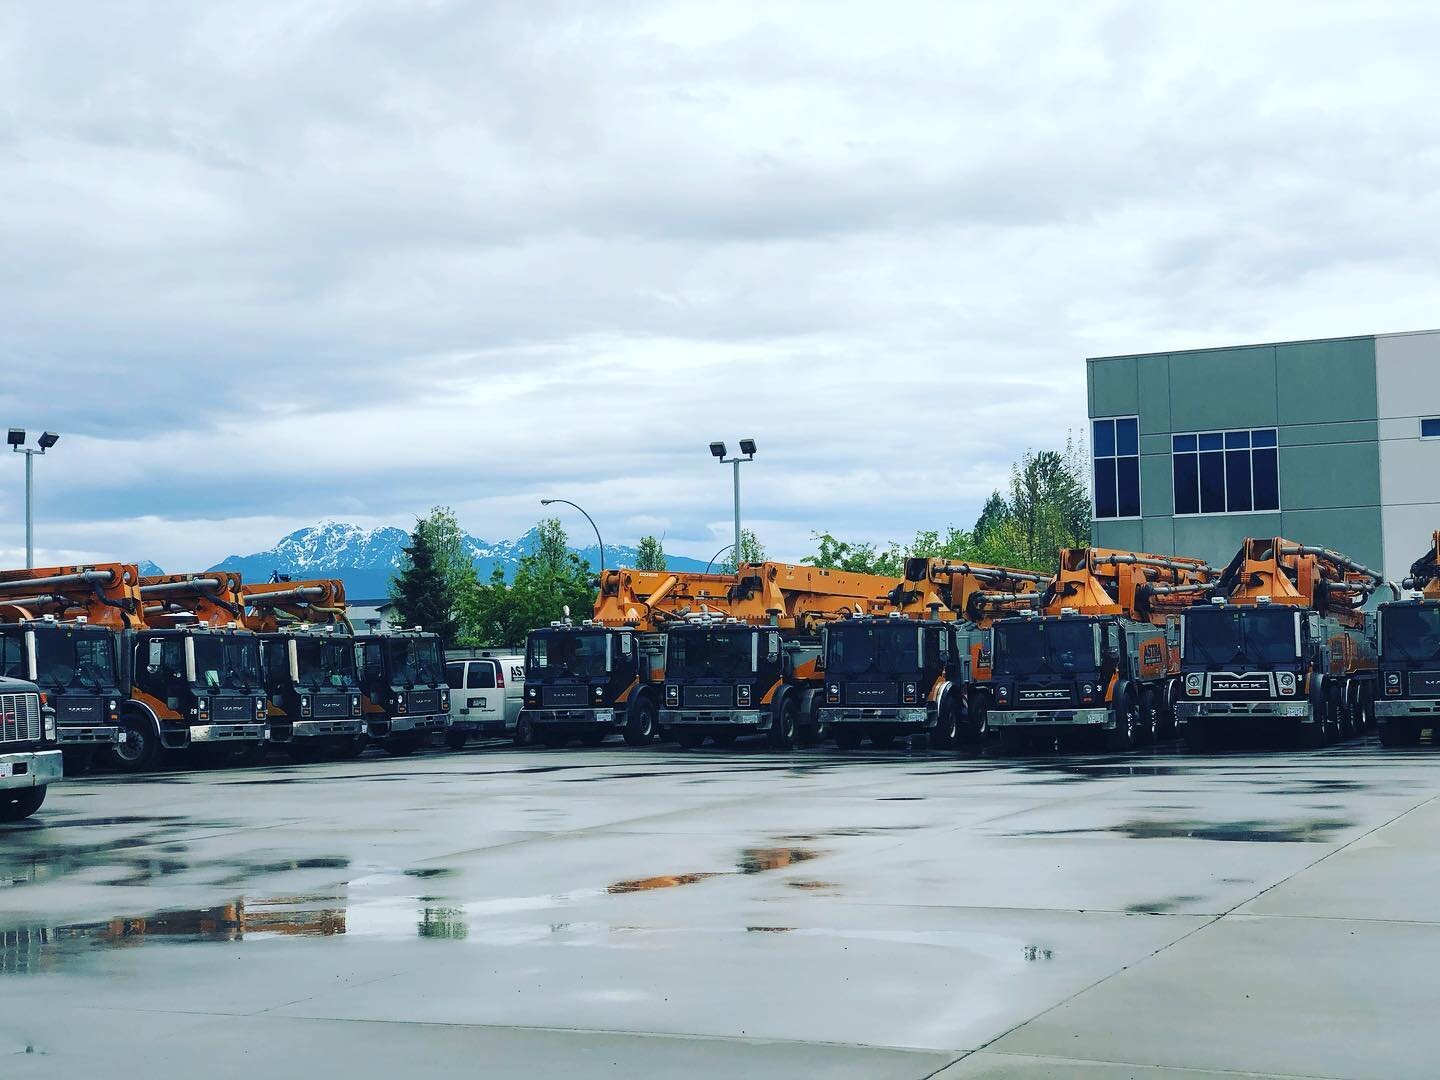 TBT to a Sunday in 2020 with the pumps in the yard

#concretepumping #concrete #concordpumps #portcoquitlam